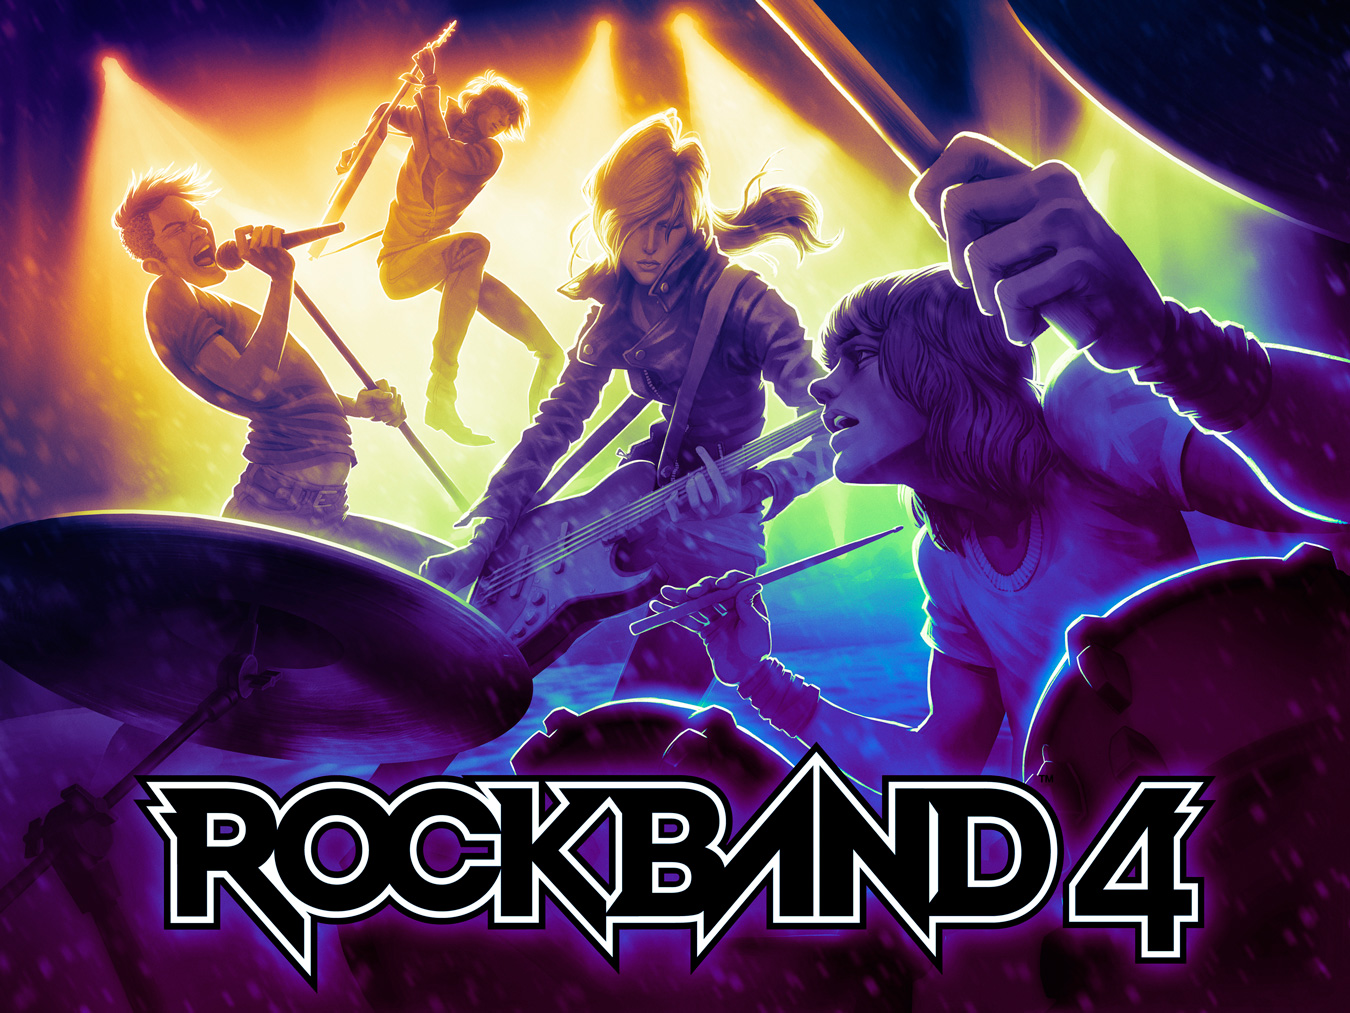 Rock Band 4 Xbox One PS4 teaser image